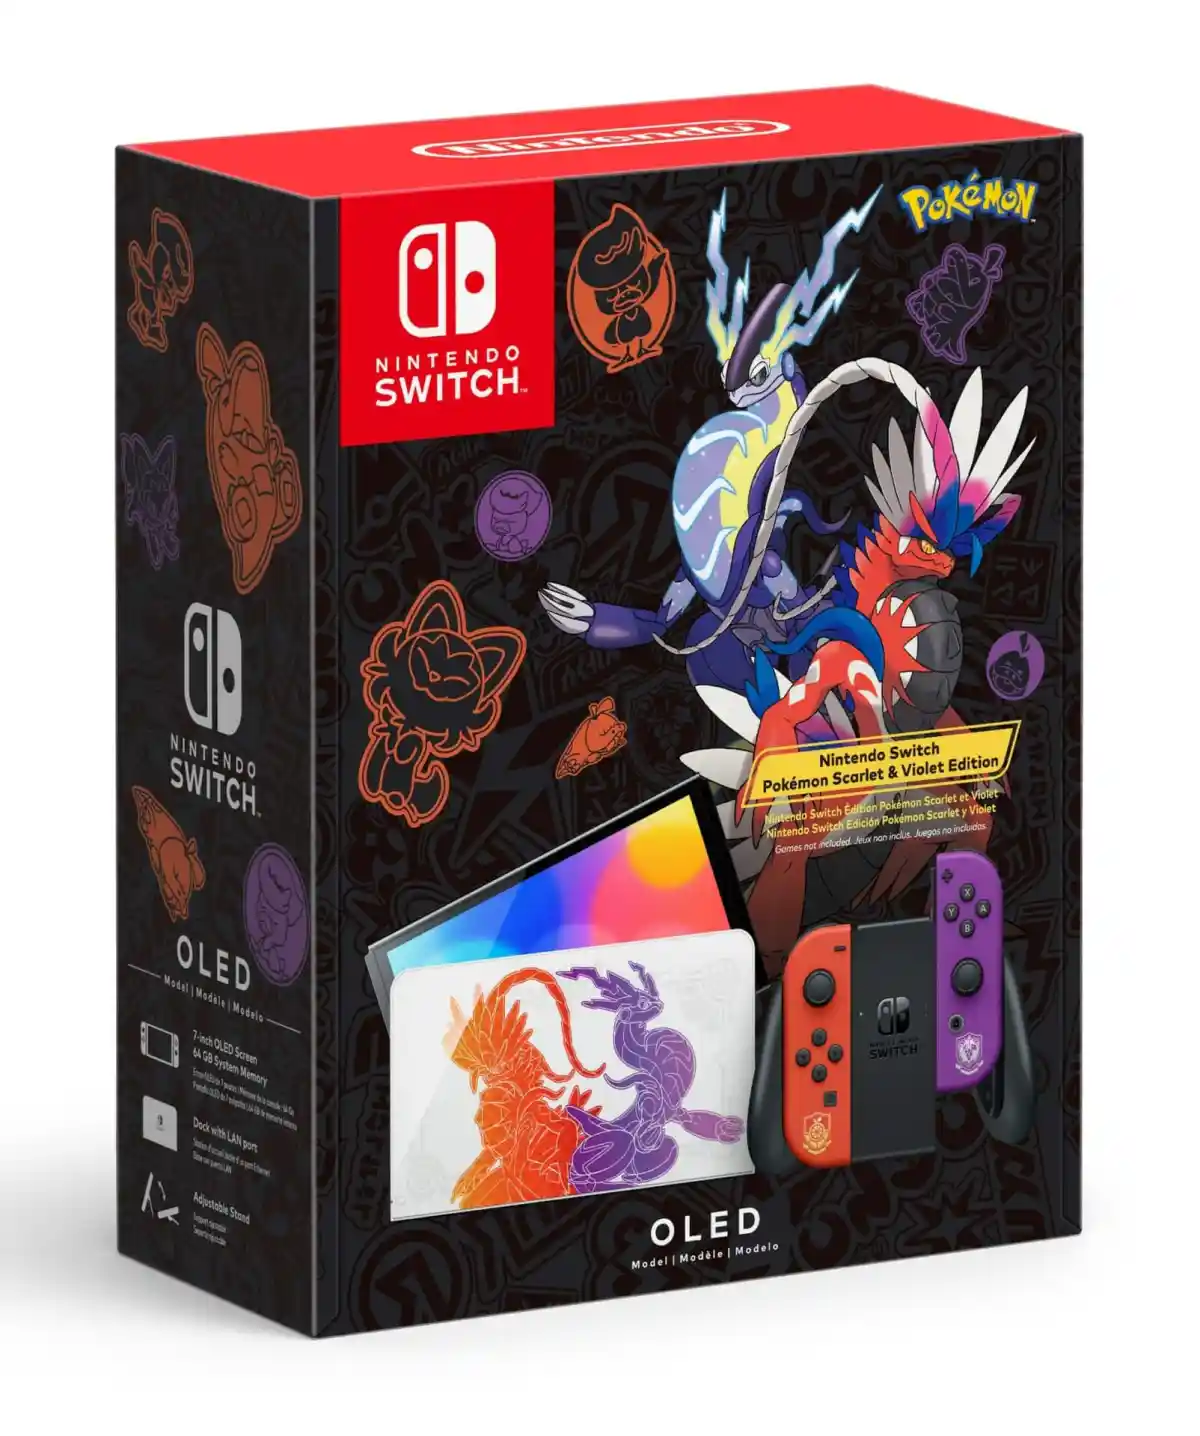 Nintendo Switch OLED Pokémon Scarlet and Violet Edition release date price November 4 $359.99